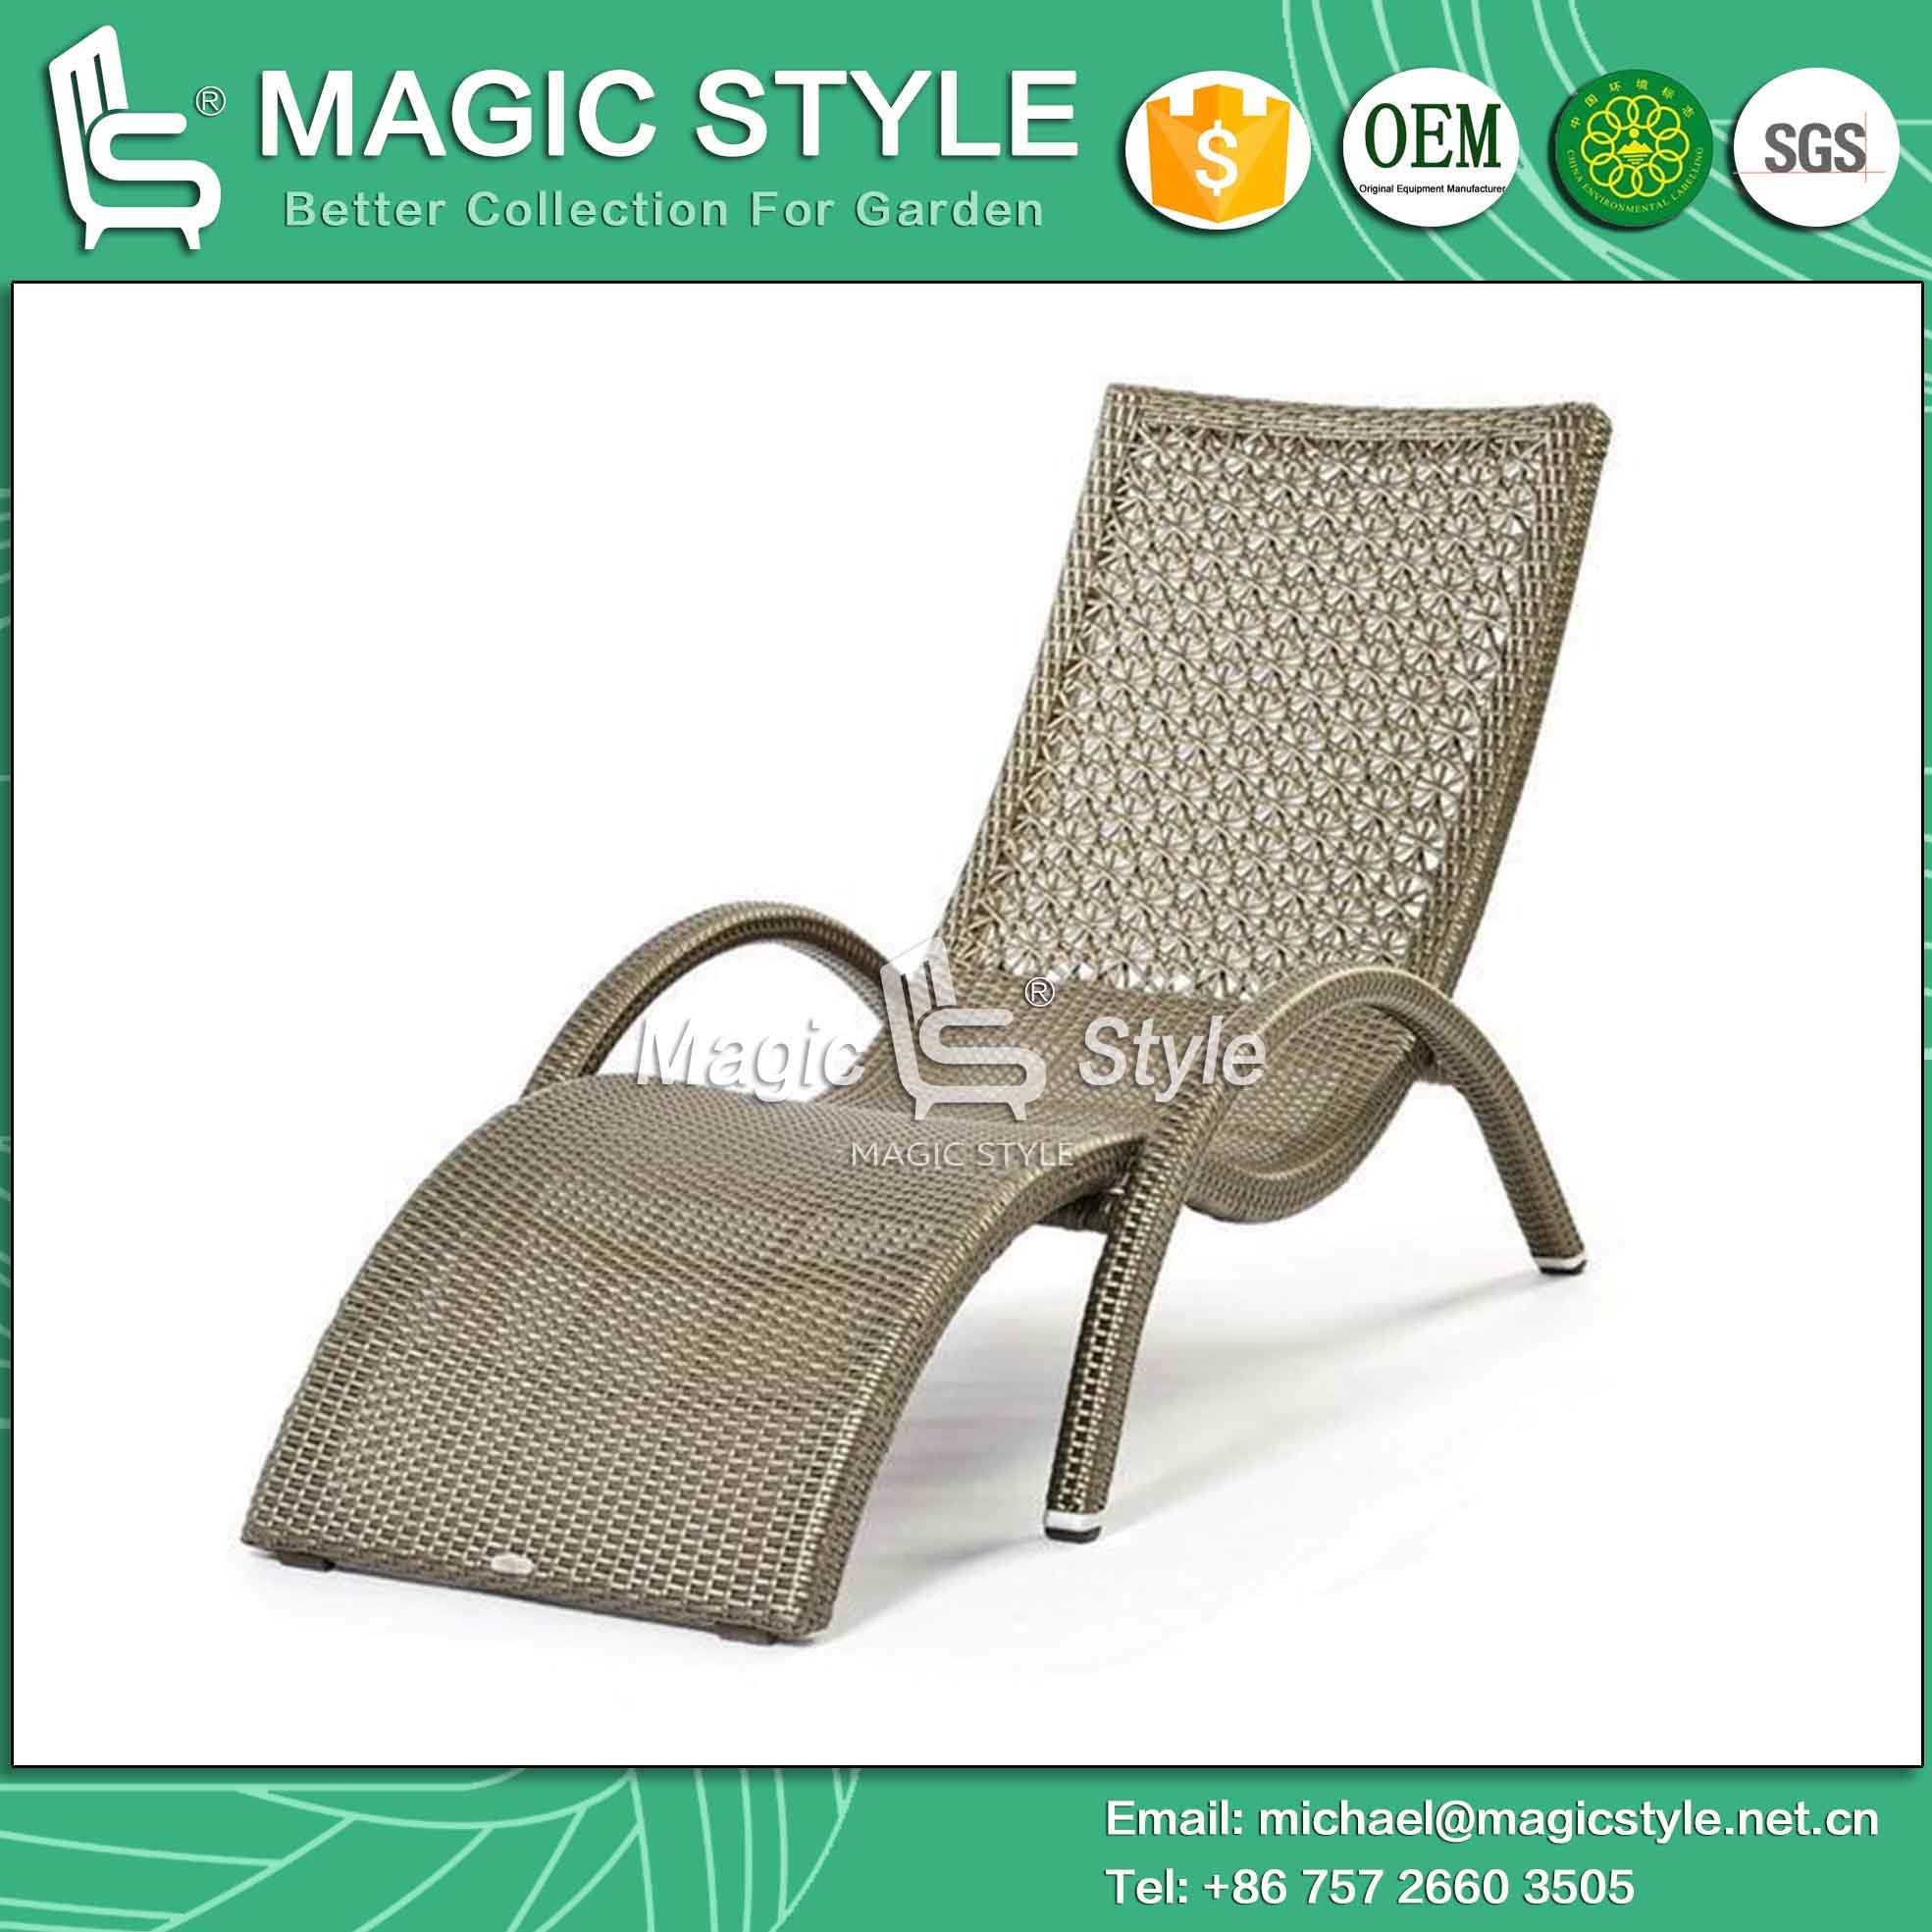 Rattan Wicker Sunlounger Outdoor Sun Bed Rattan Daybed Patio Furniture Garden Furniture Beach Chair Hotel Project Sunlounger Leisure Chair (Magic Style)